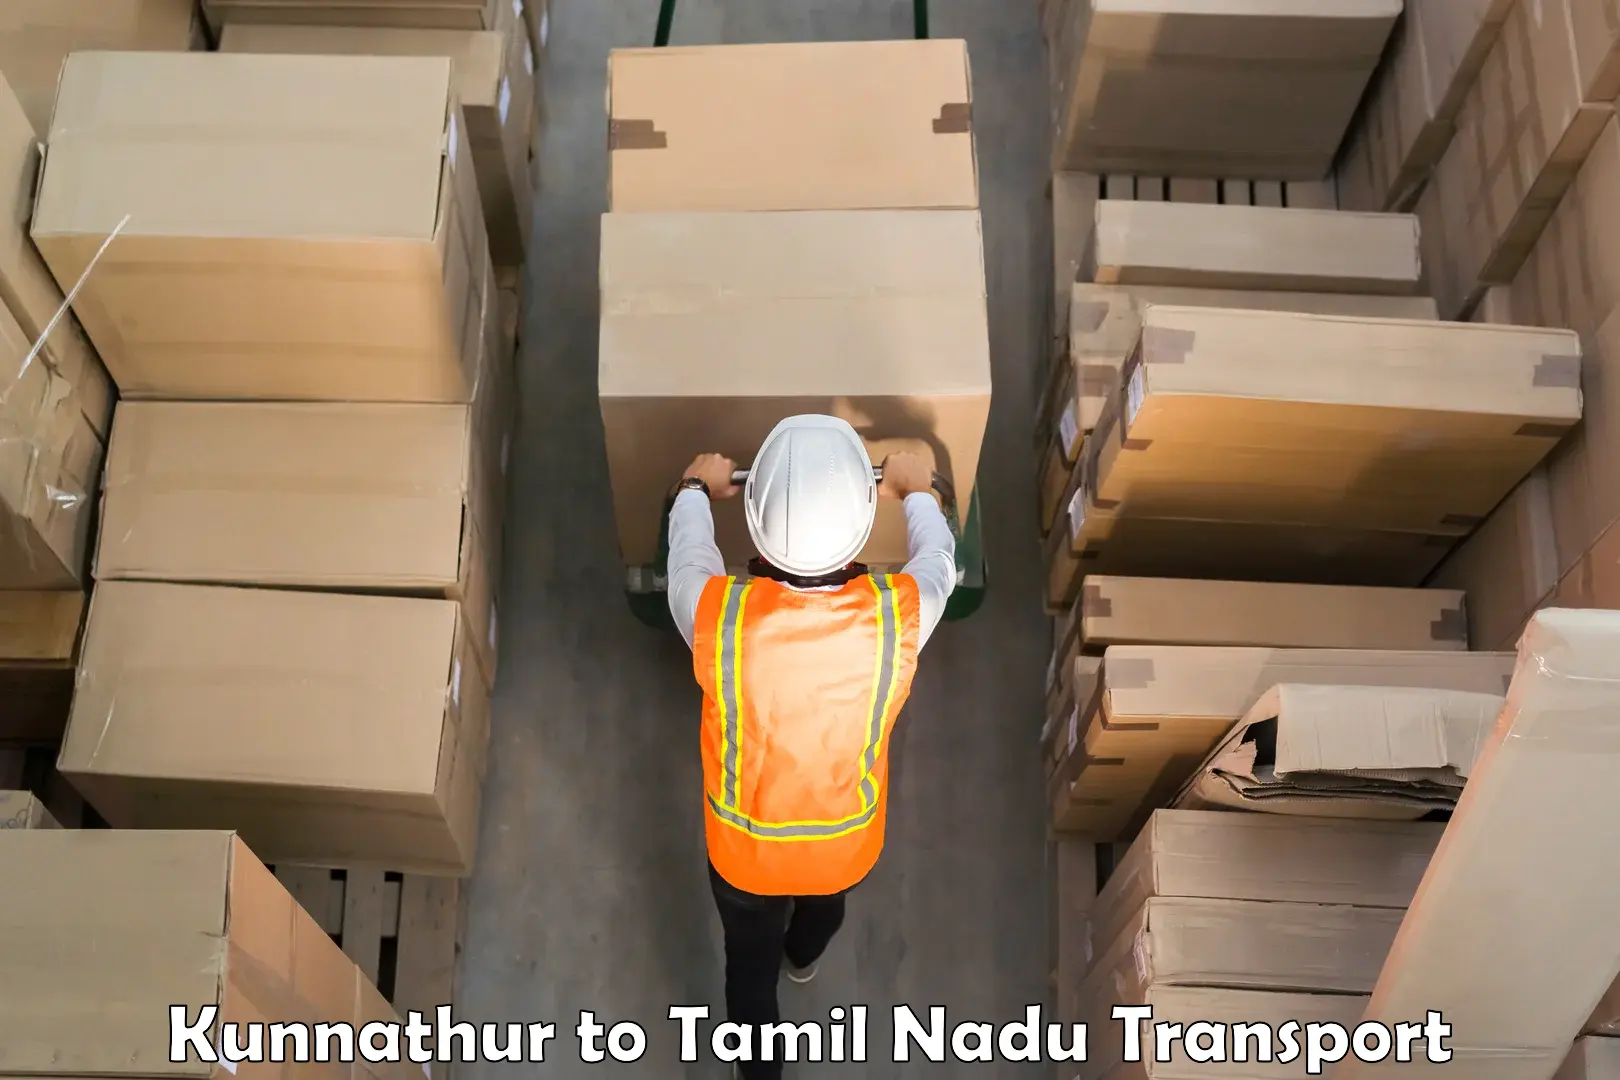 Domestic transport services Kunnathur to Coimbatore